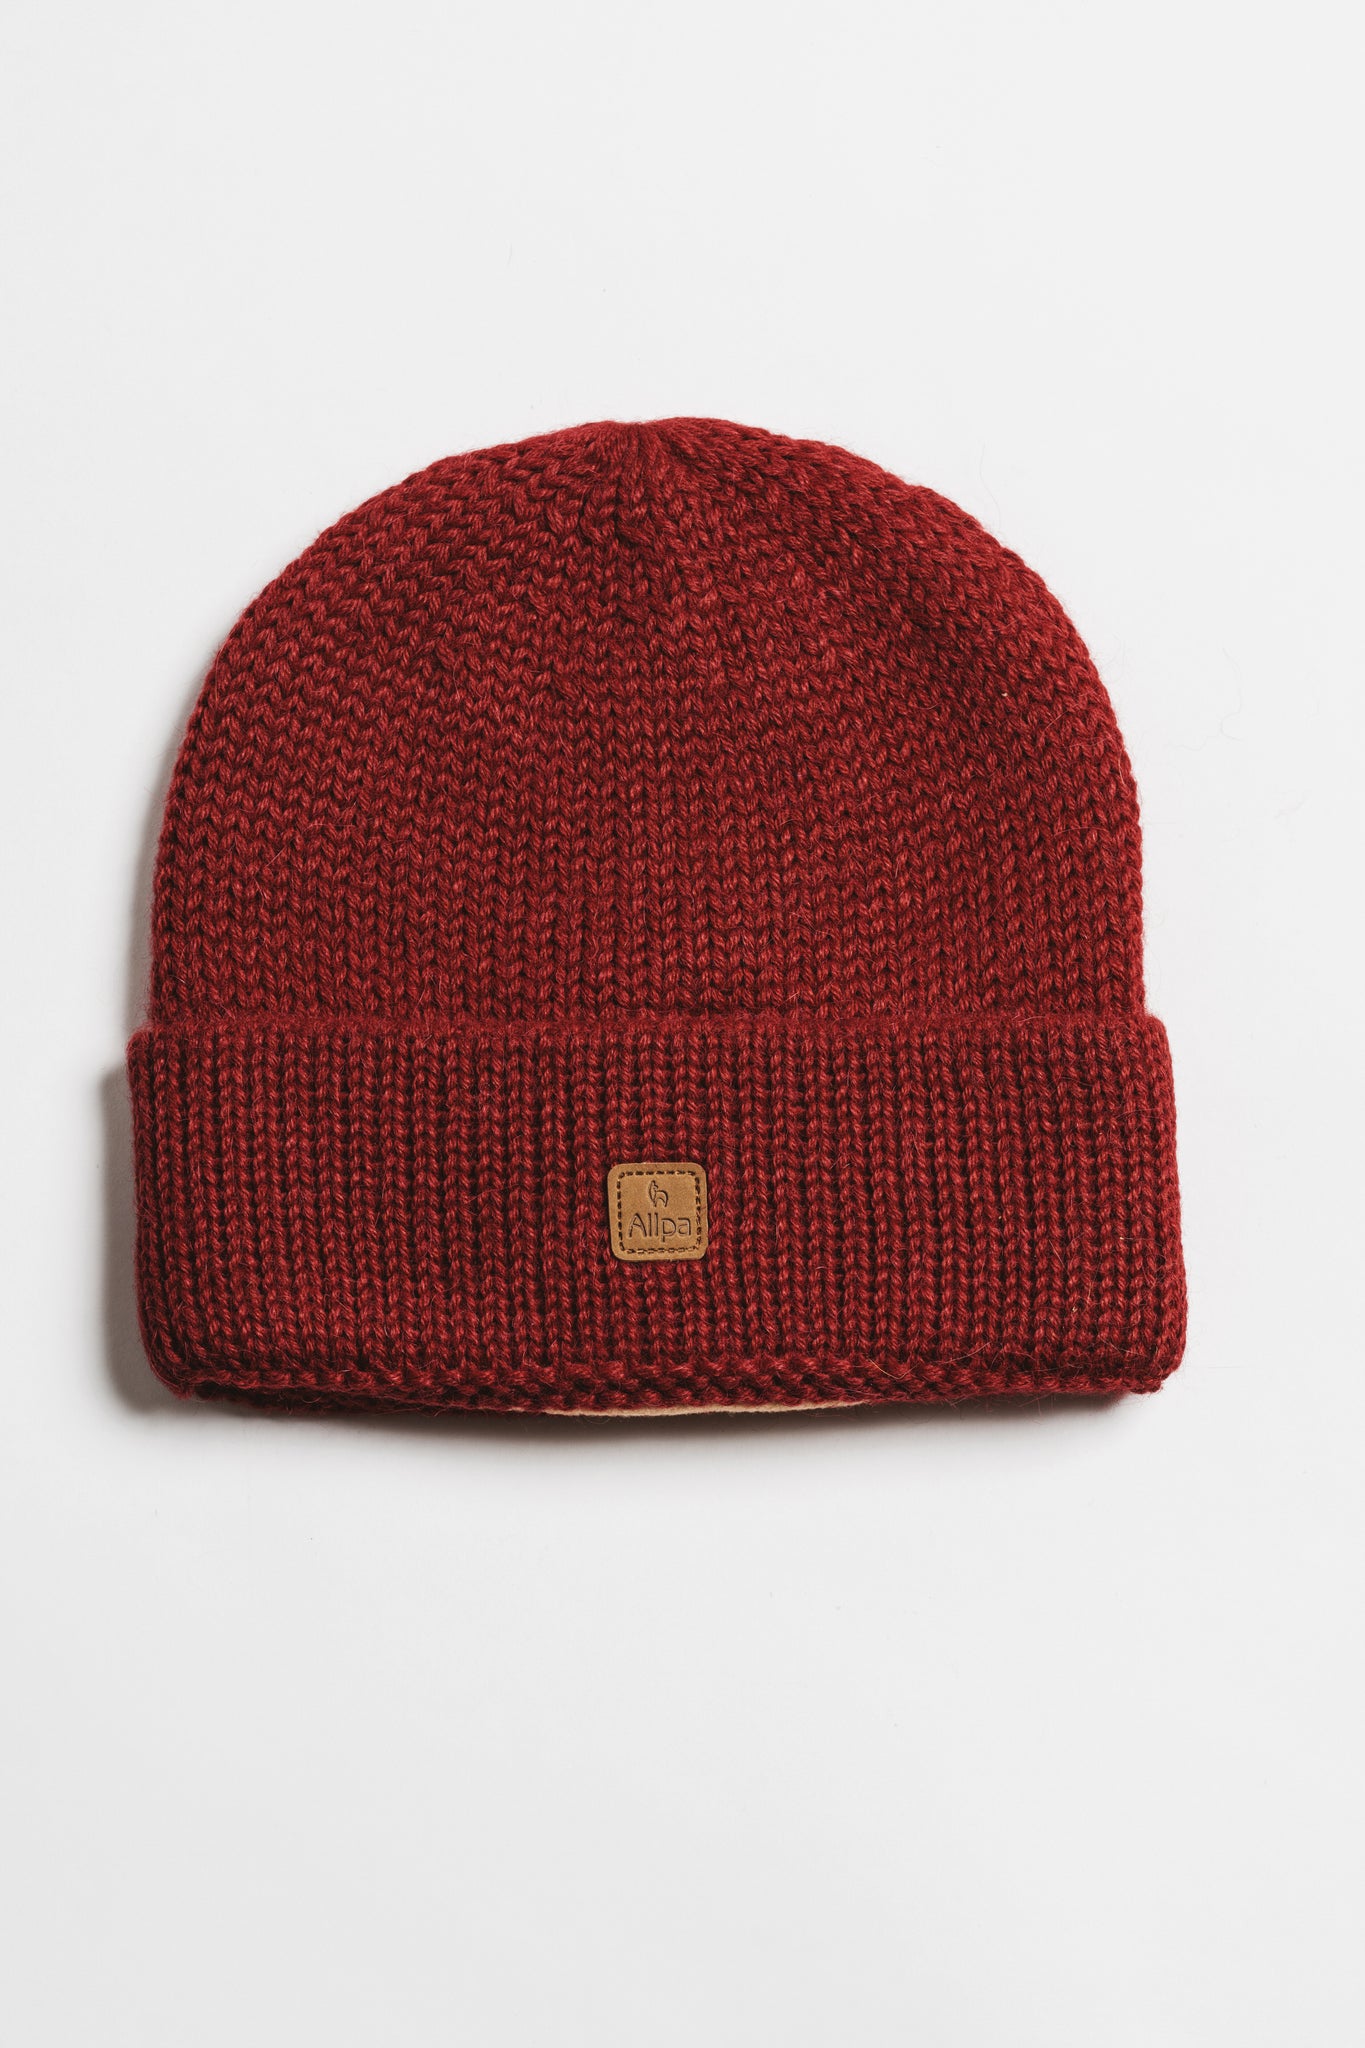 The Tuque